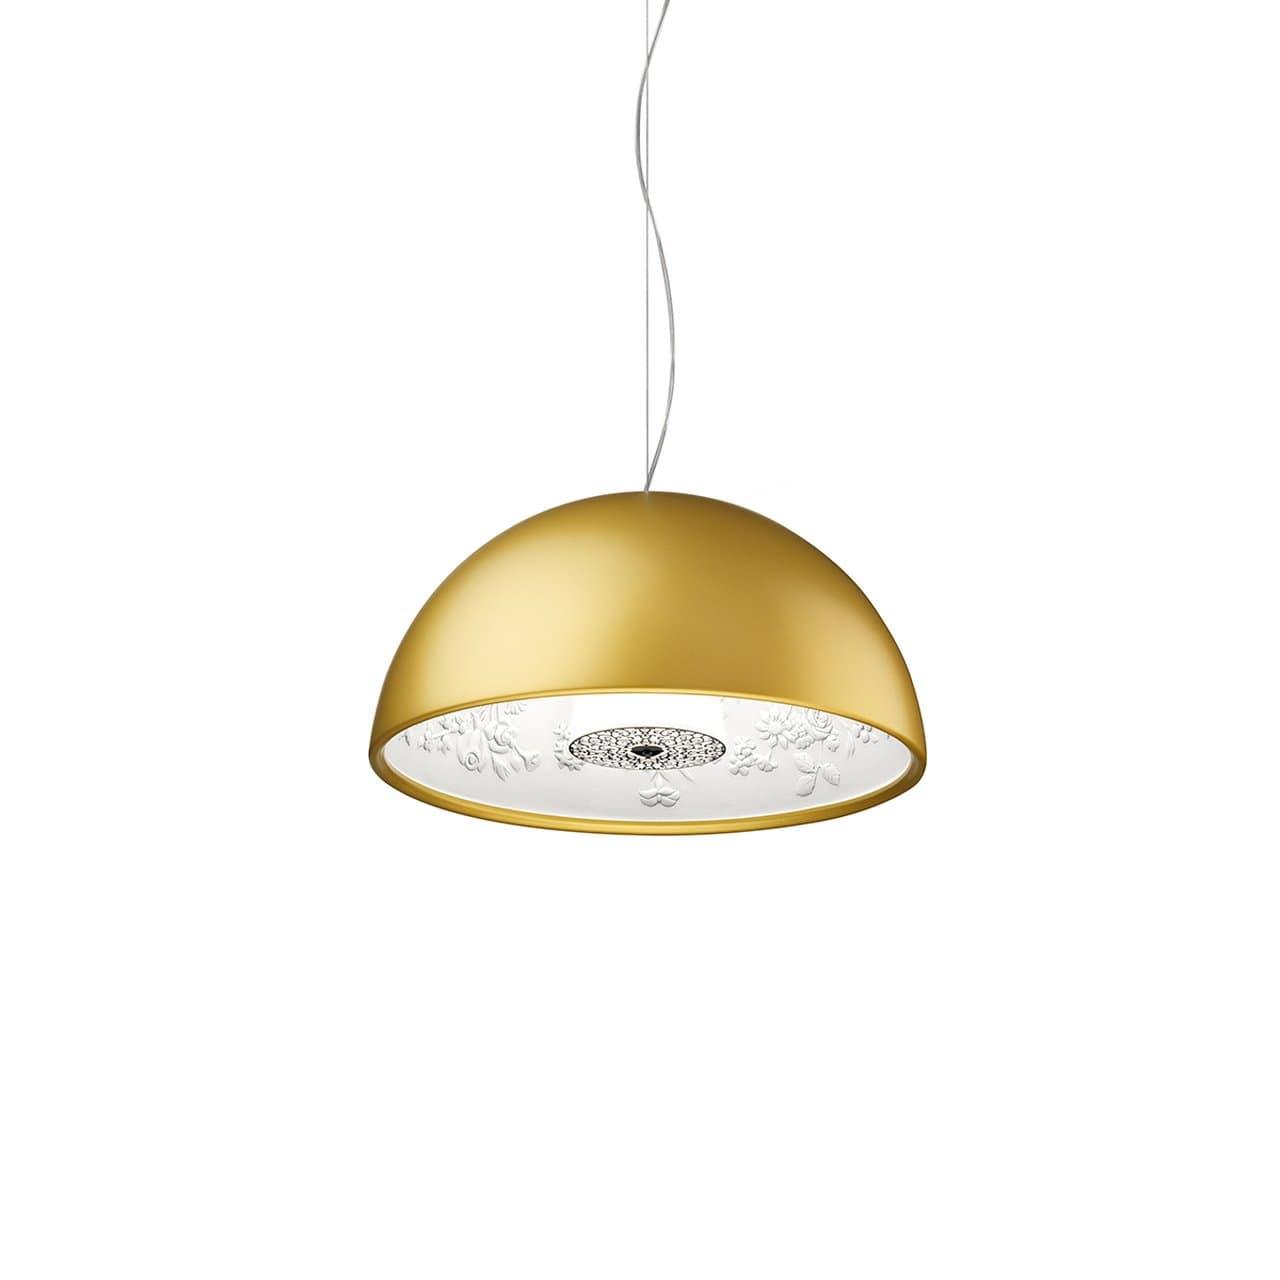 Skygarden S - Small - Curated - Lighting - Flos